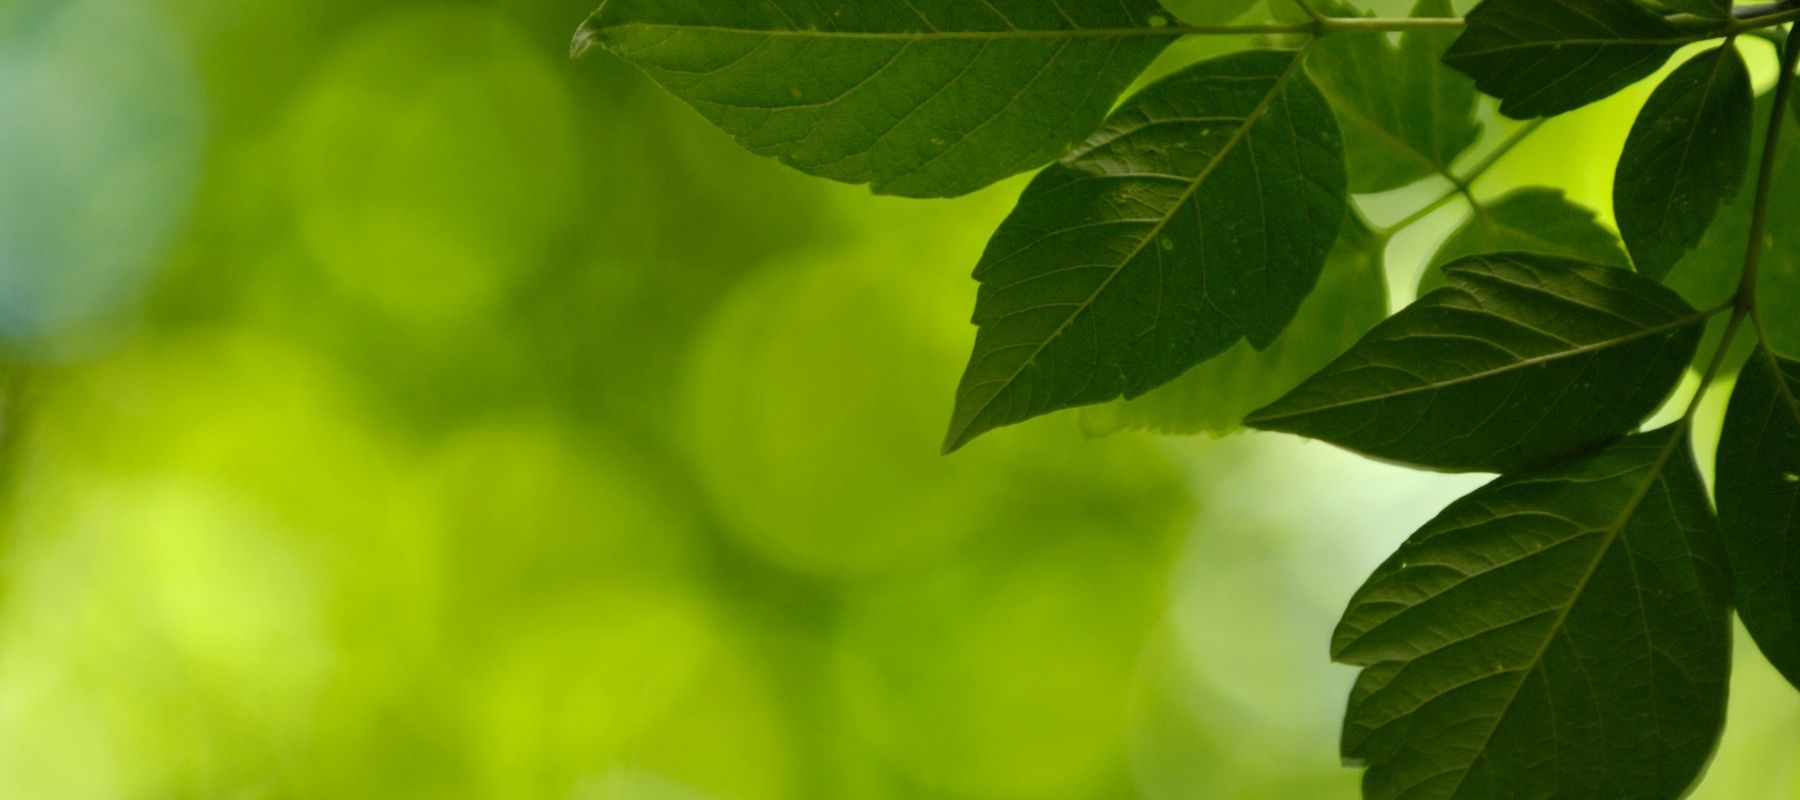 focus on green leaves with blurred out green background